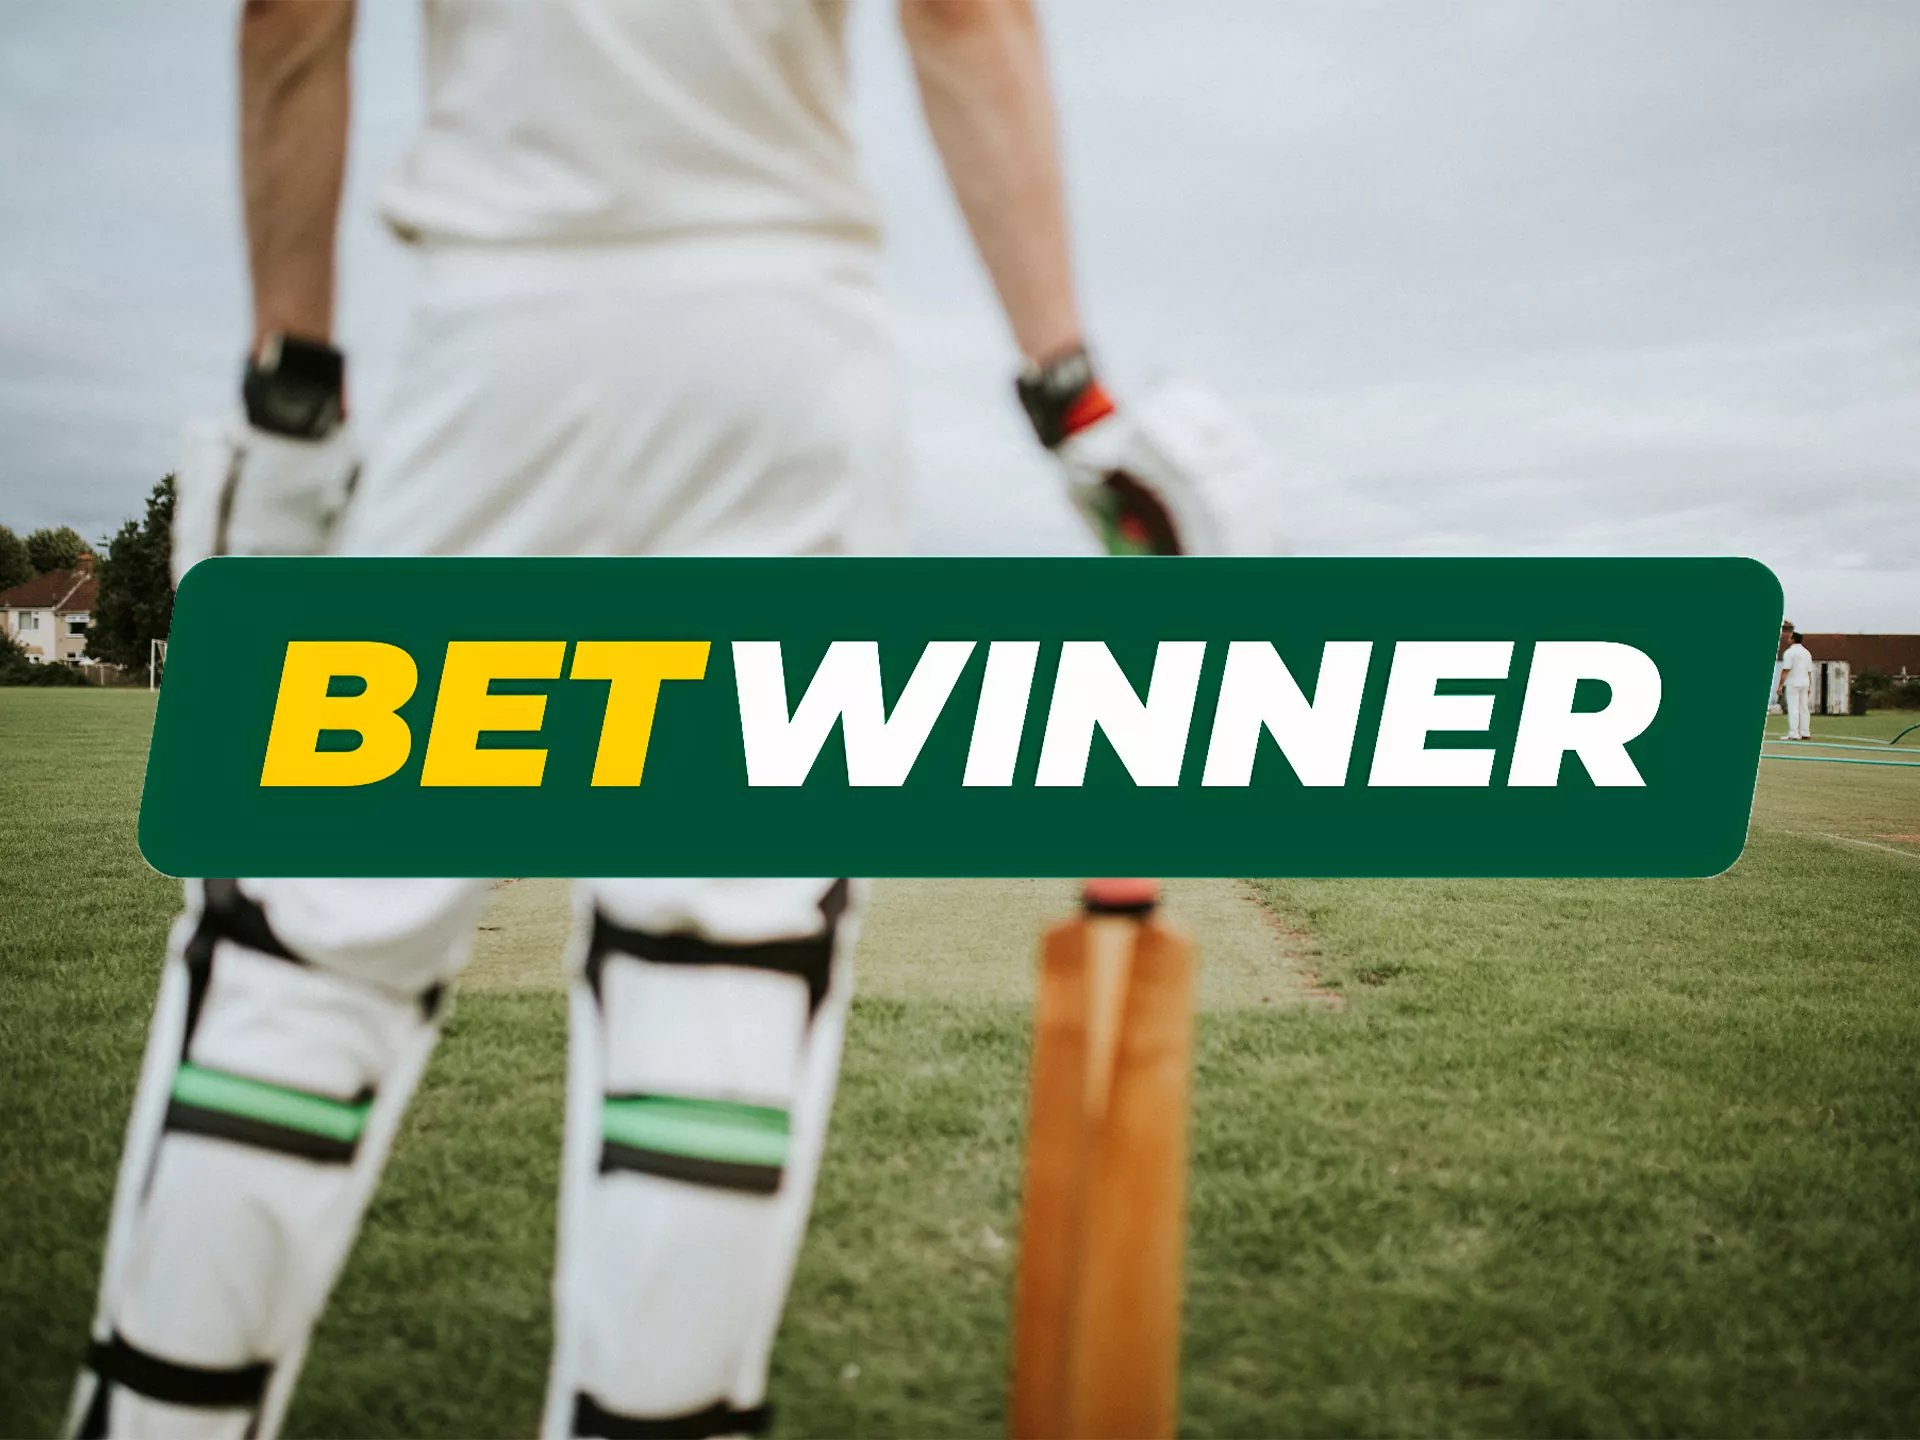 Go to the official site and learn more about betting on cricket at Betwinner.